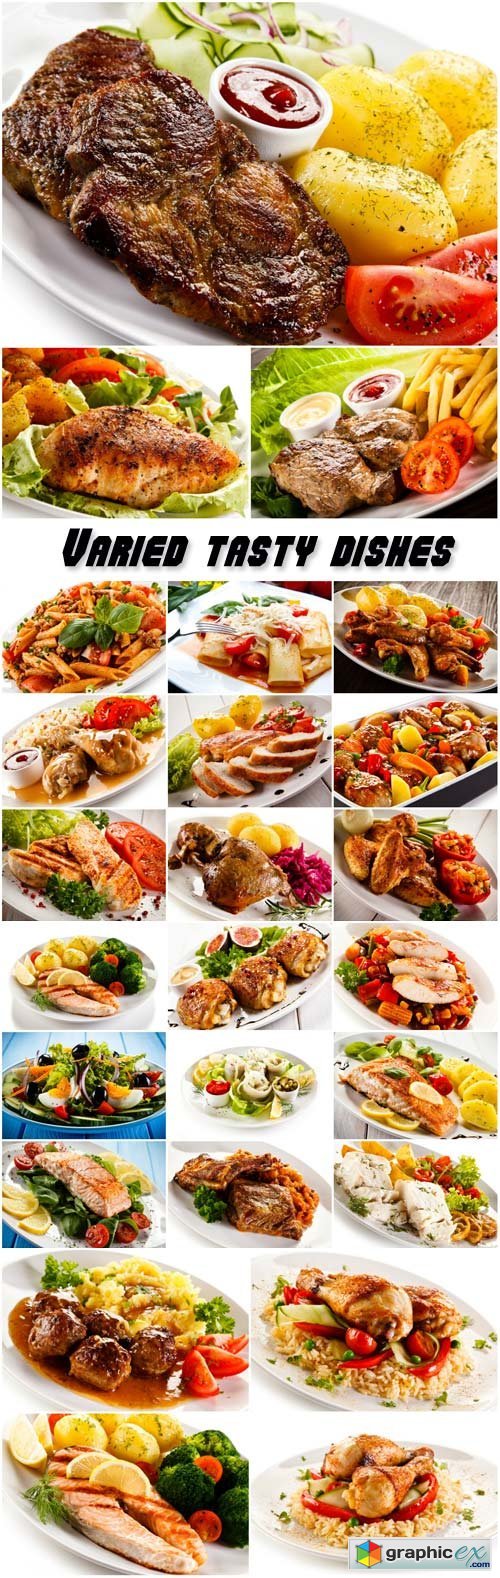 Varied tasty dishes